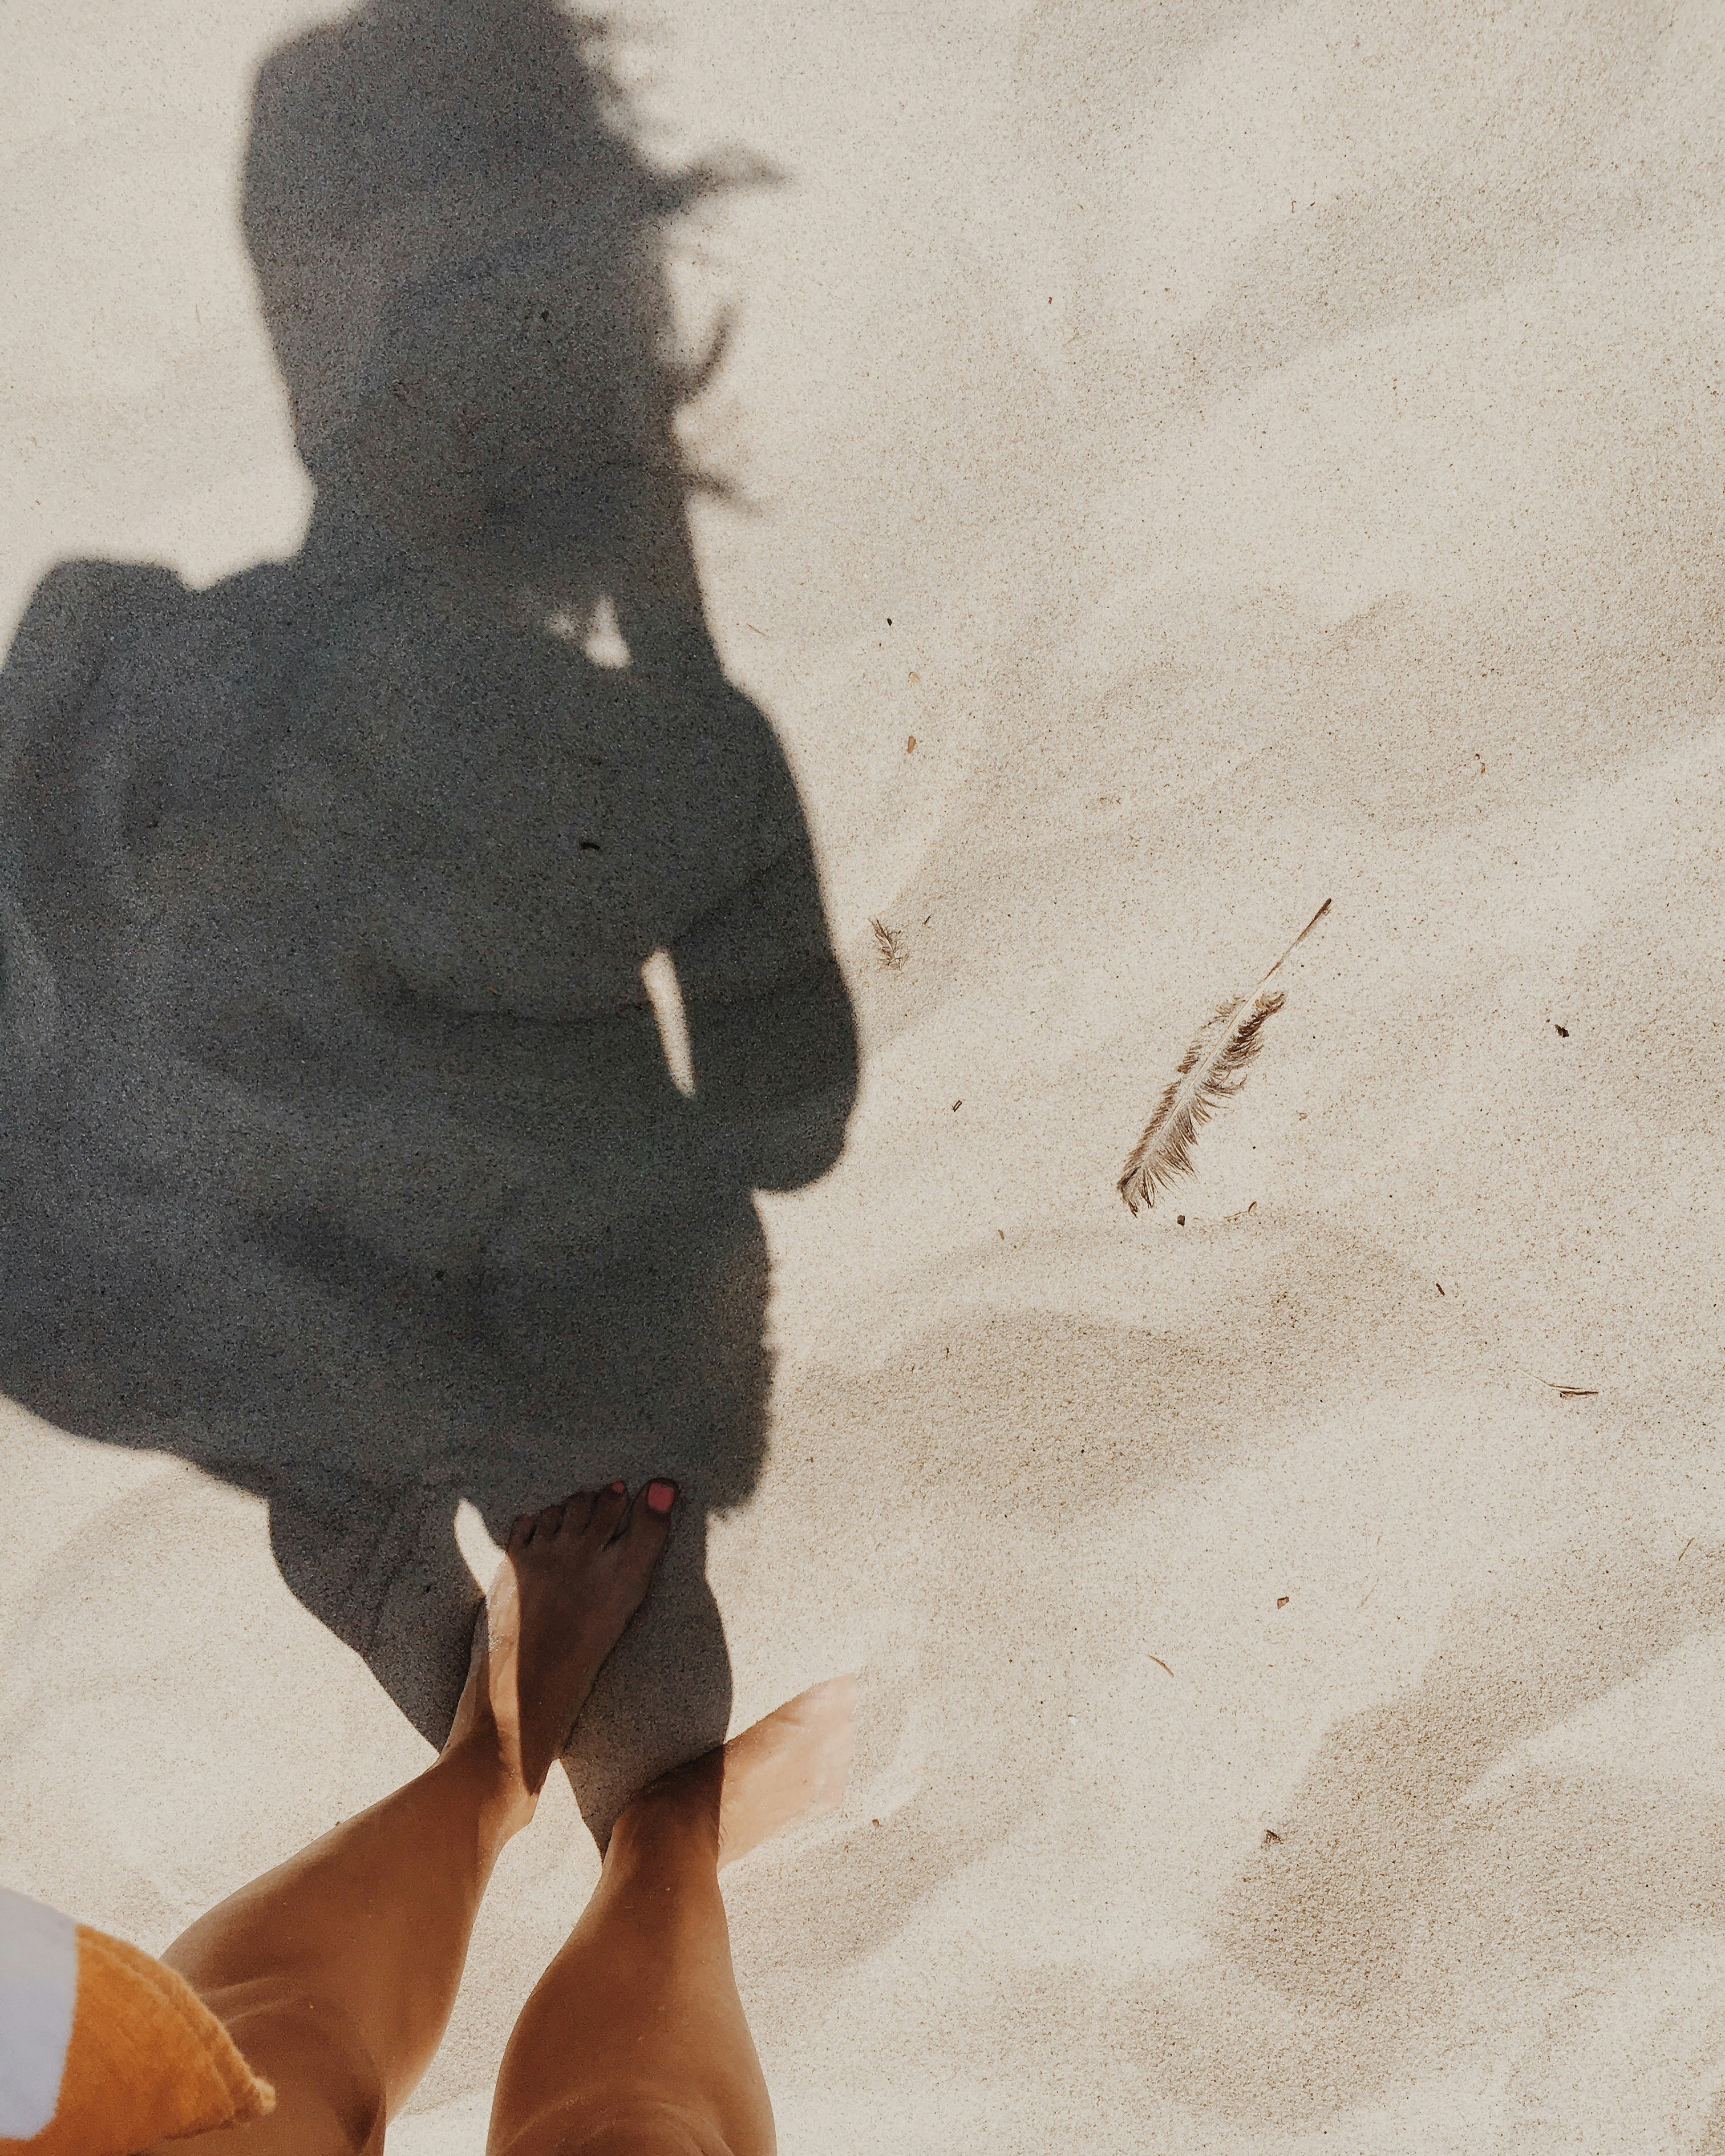 The shadow of a woman standing in the sand on a beach.